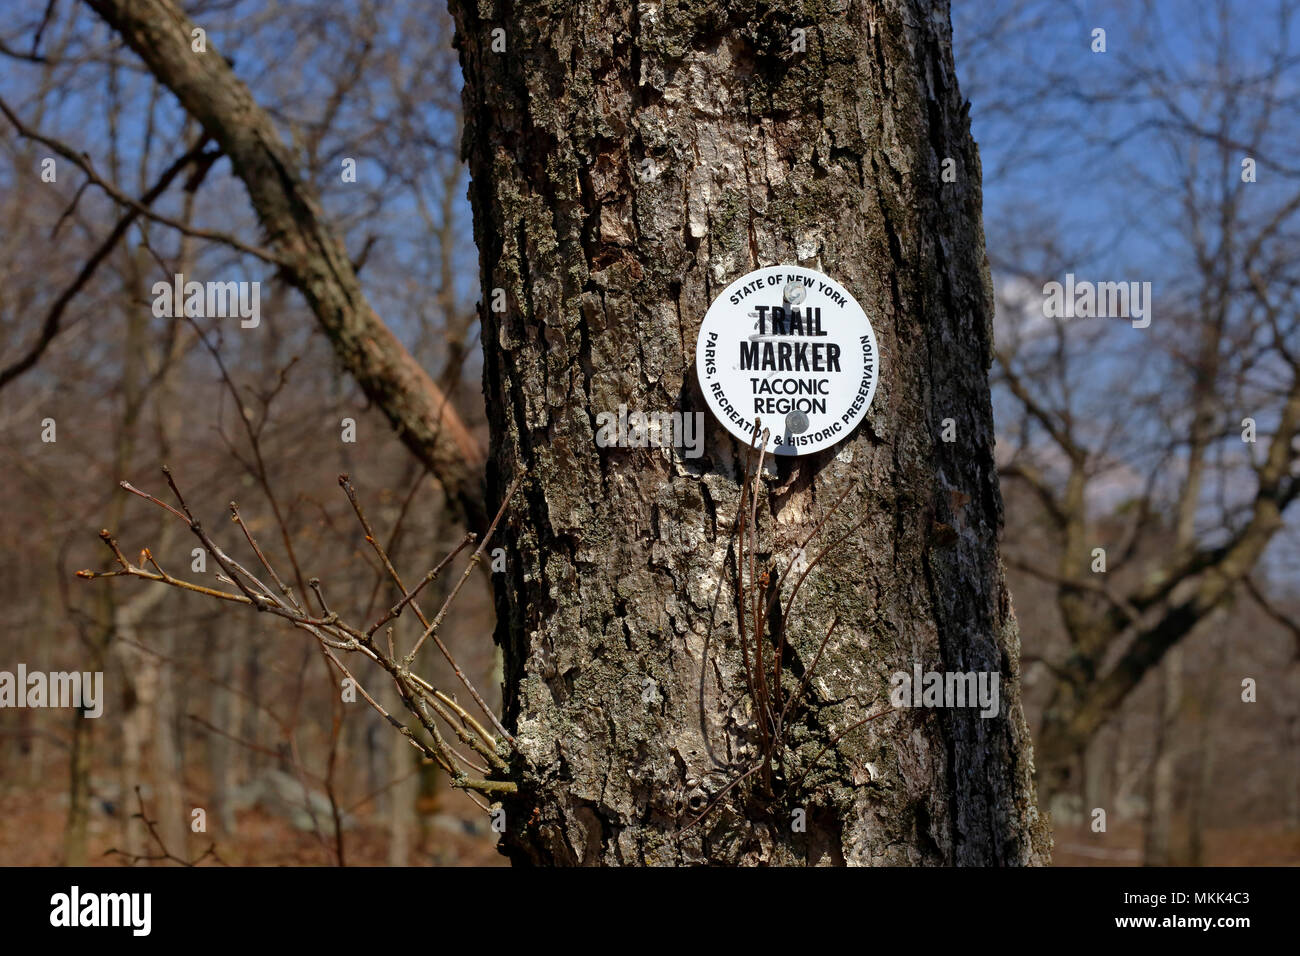 A Taconic Region white trail marker, New York State Stock Photo